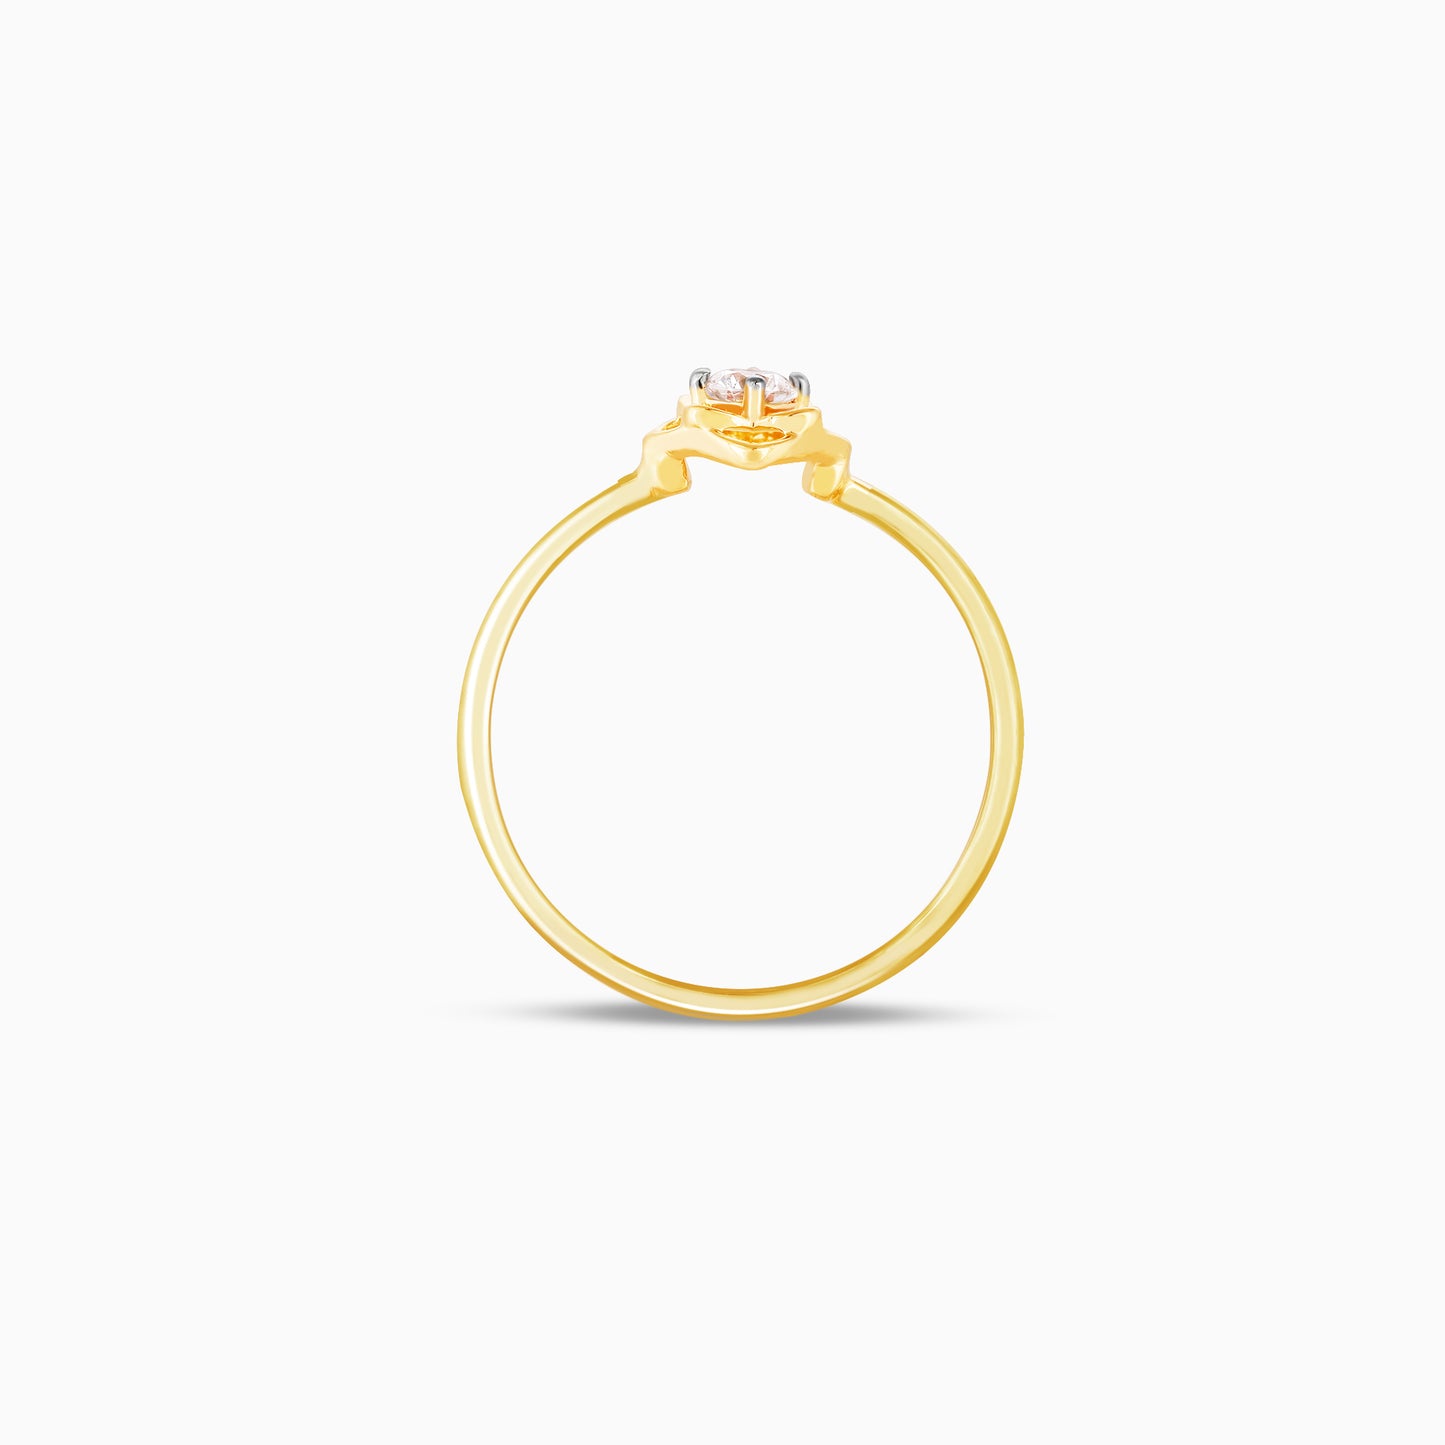 Gold Floral Solitaire Diamond Ring